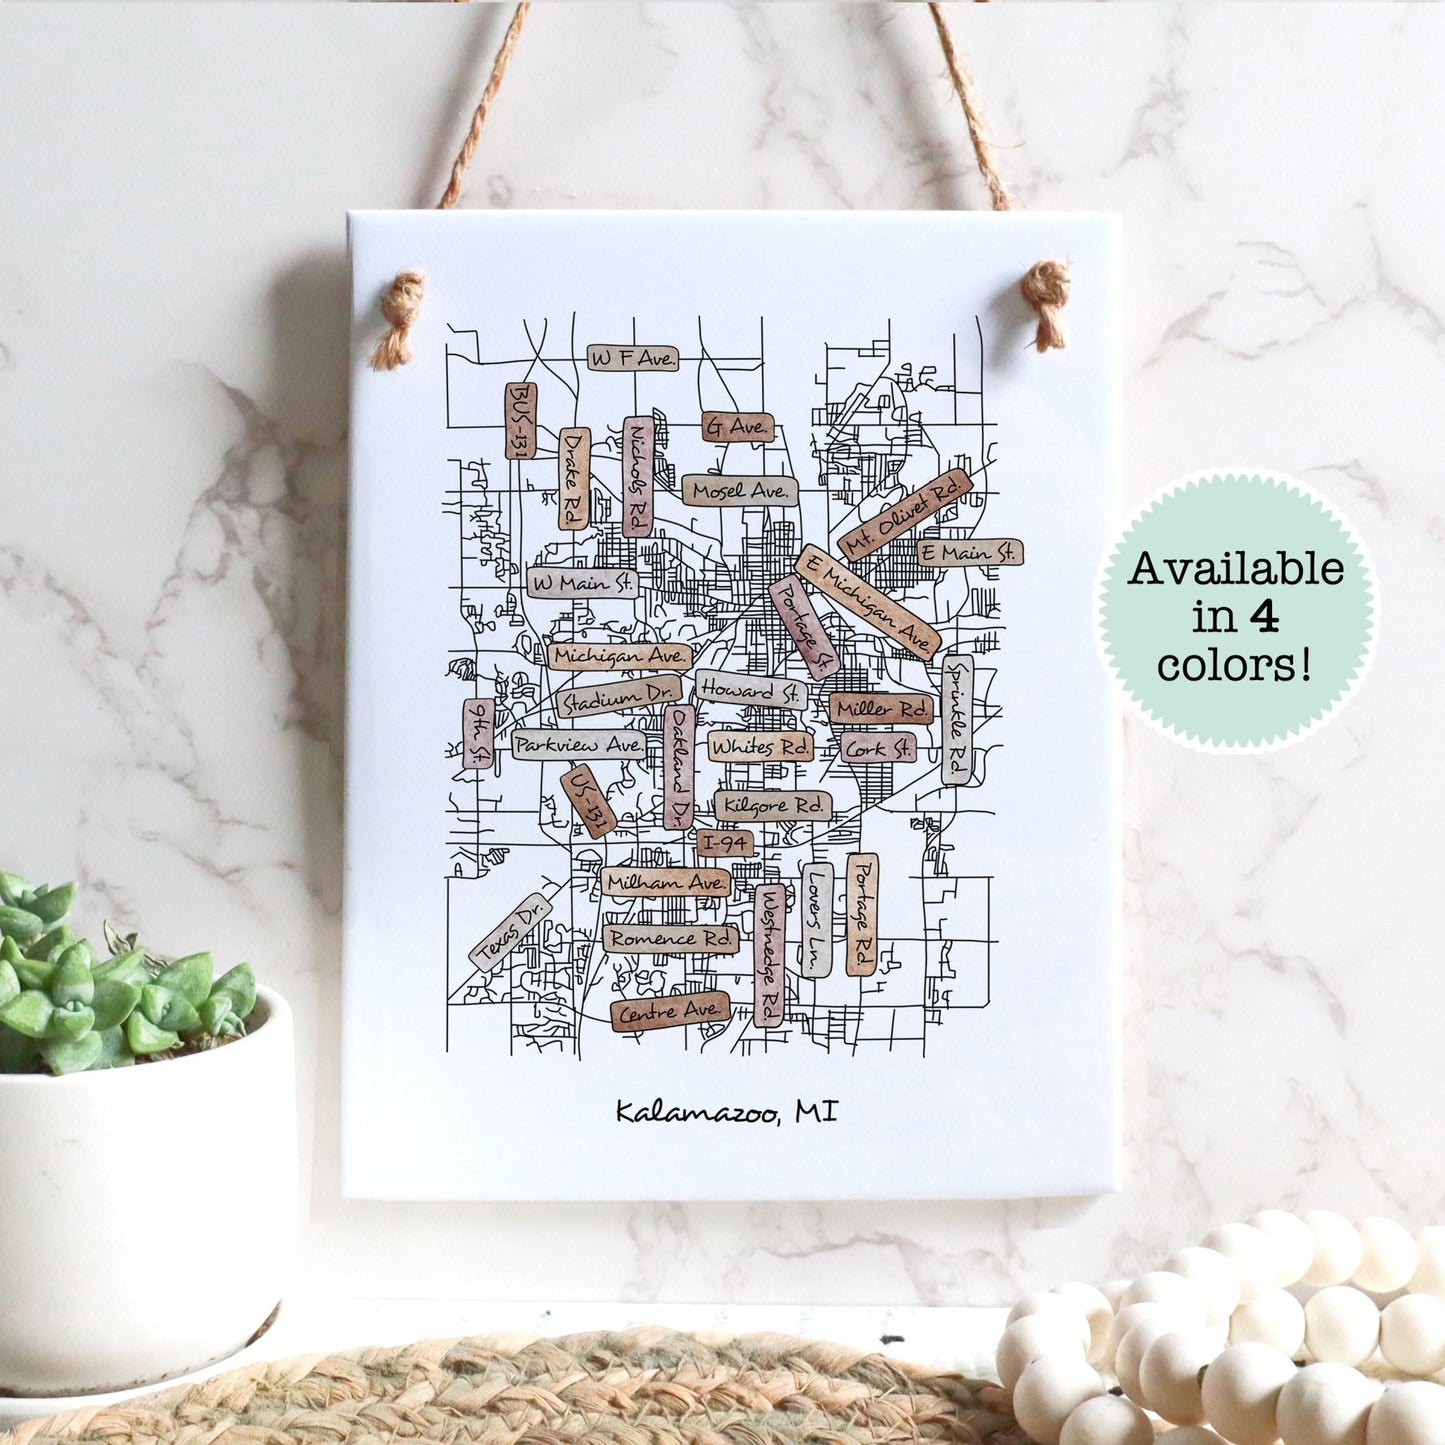 A street map drawing of Kalamazoo MI on a rectangle tile sign hanging on a wall - Sparks House Co